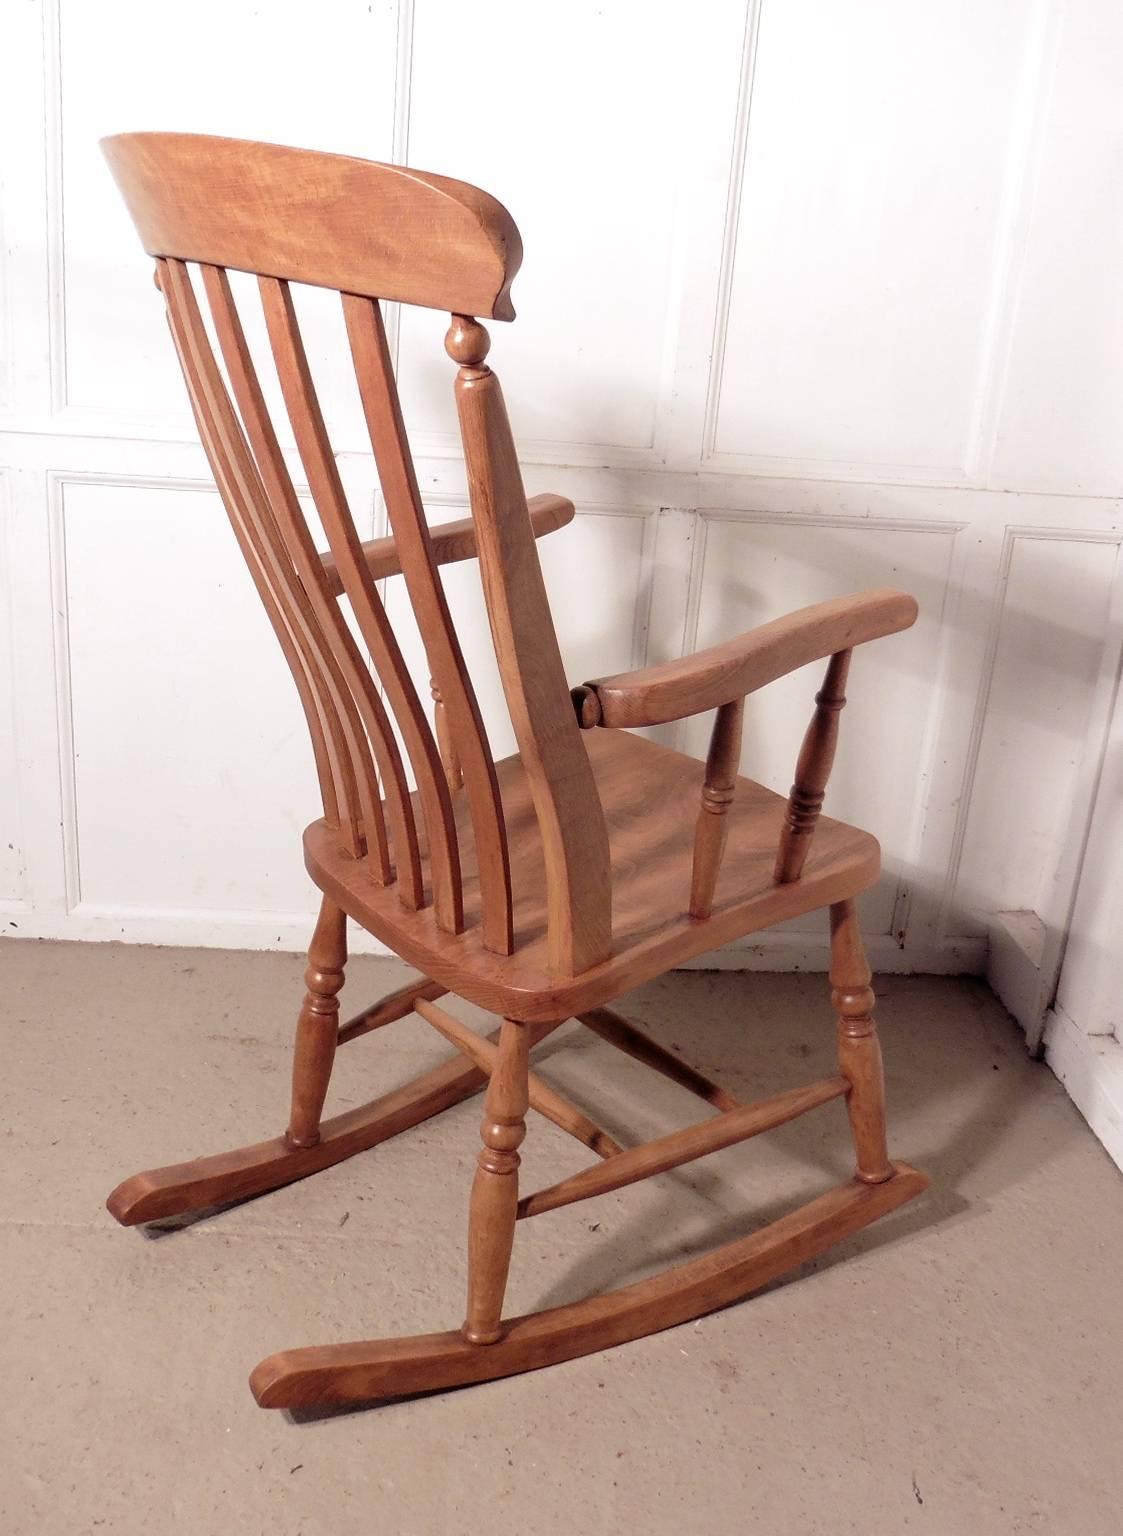 Victorian beech and elm slat back carver rocking chair

This superb old granddad chair has the most beautiful golden patina, and a beautifully figured elm seat
The chair has a high slat back and very attractive turnings on the legs and arm